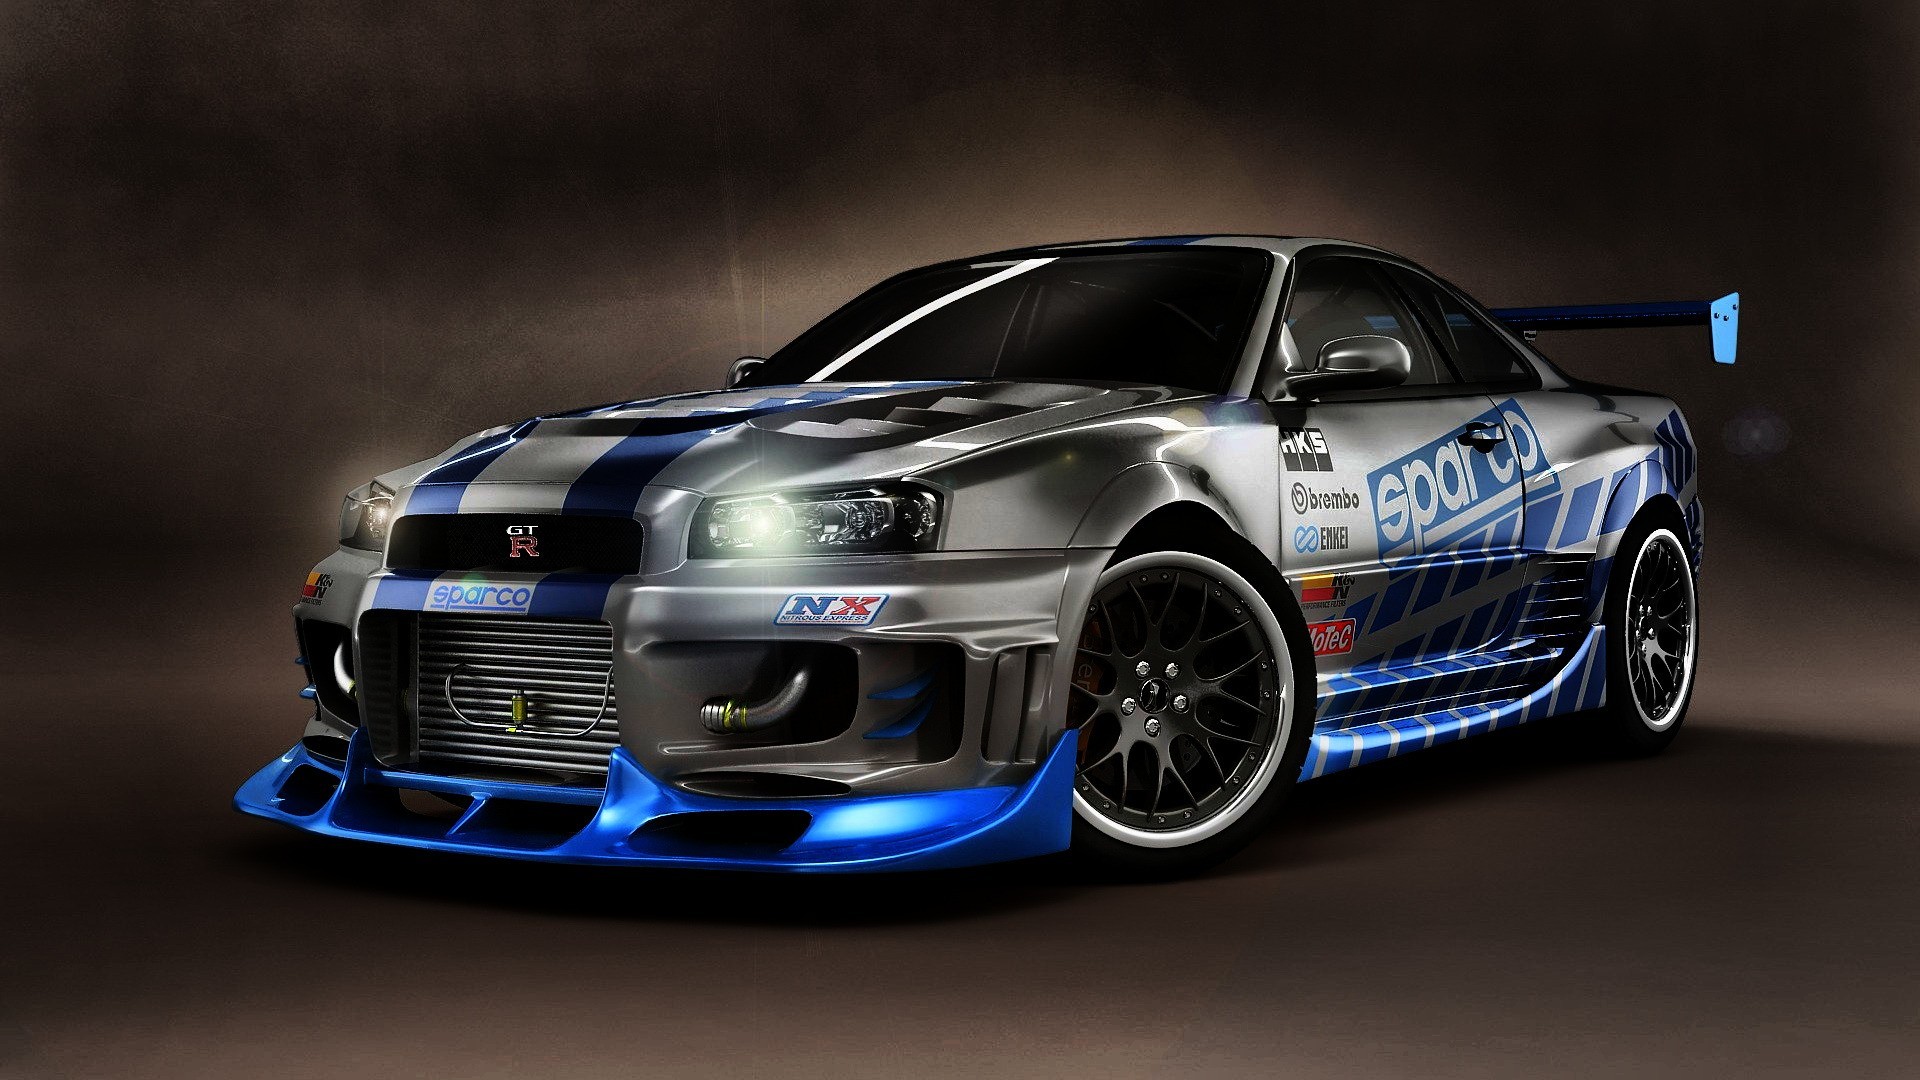 1920x1080 ... stance wallpapers; nissan skyline gtr r34 amazing auto hd picture  collection 19 ...